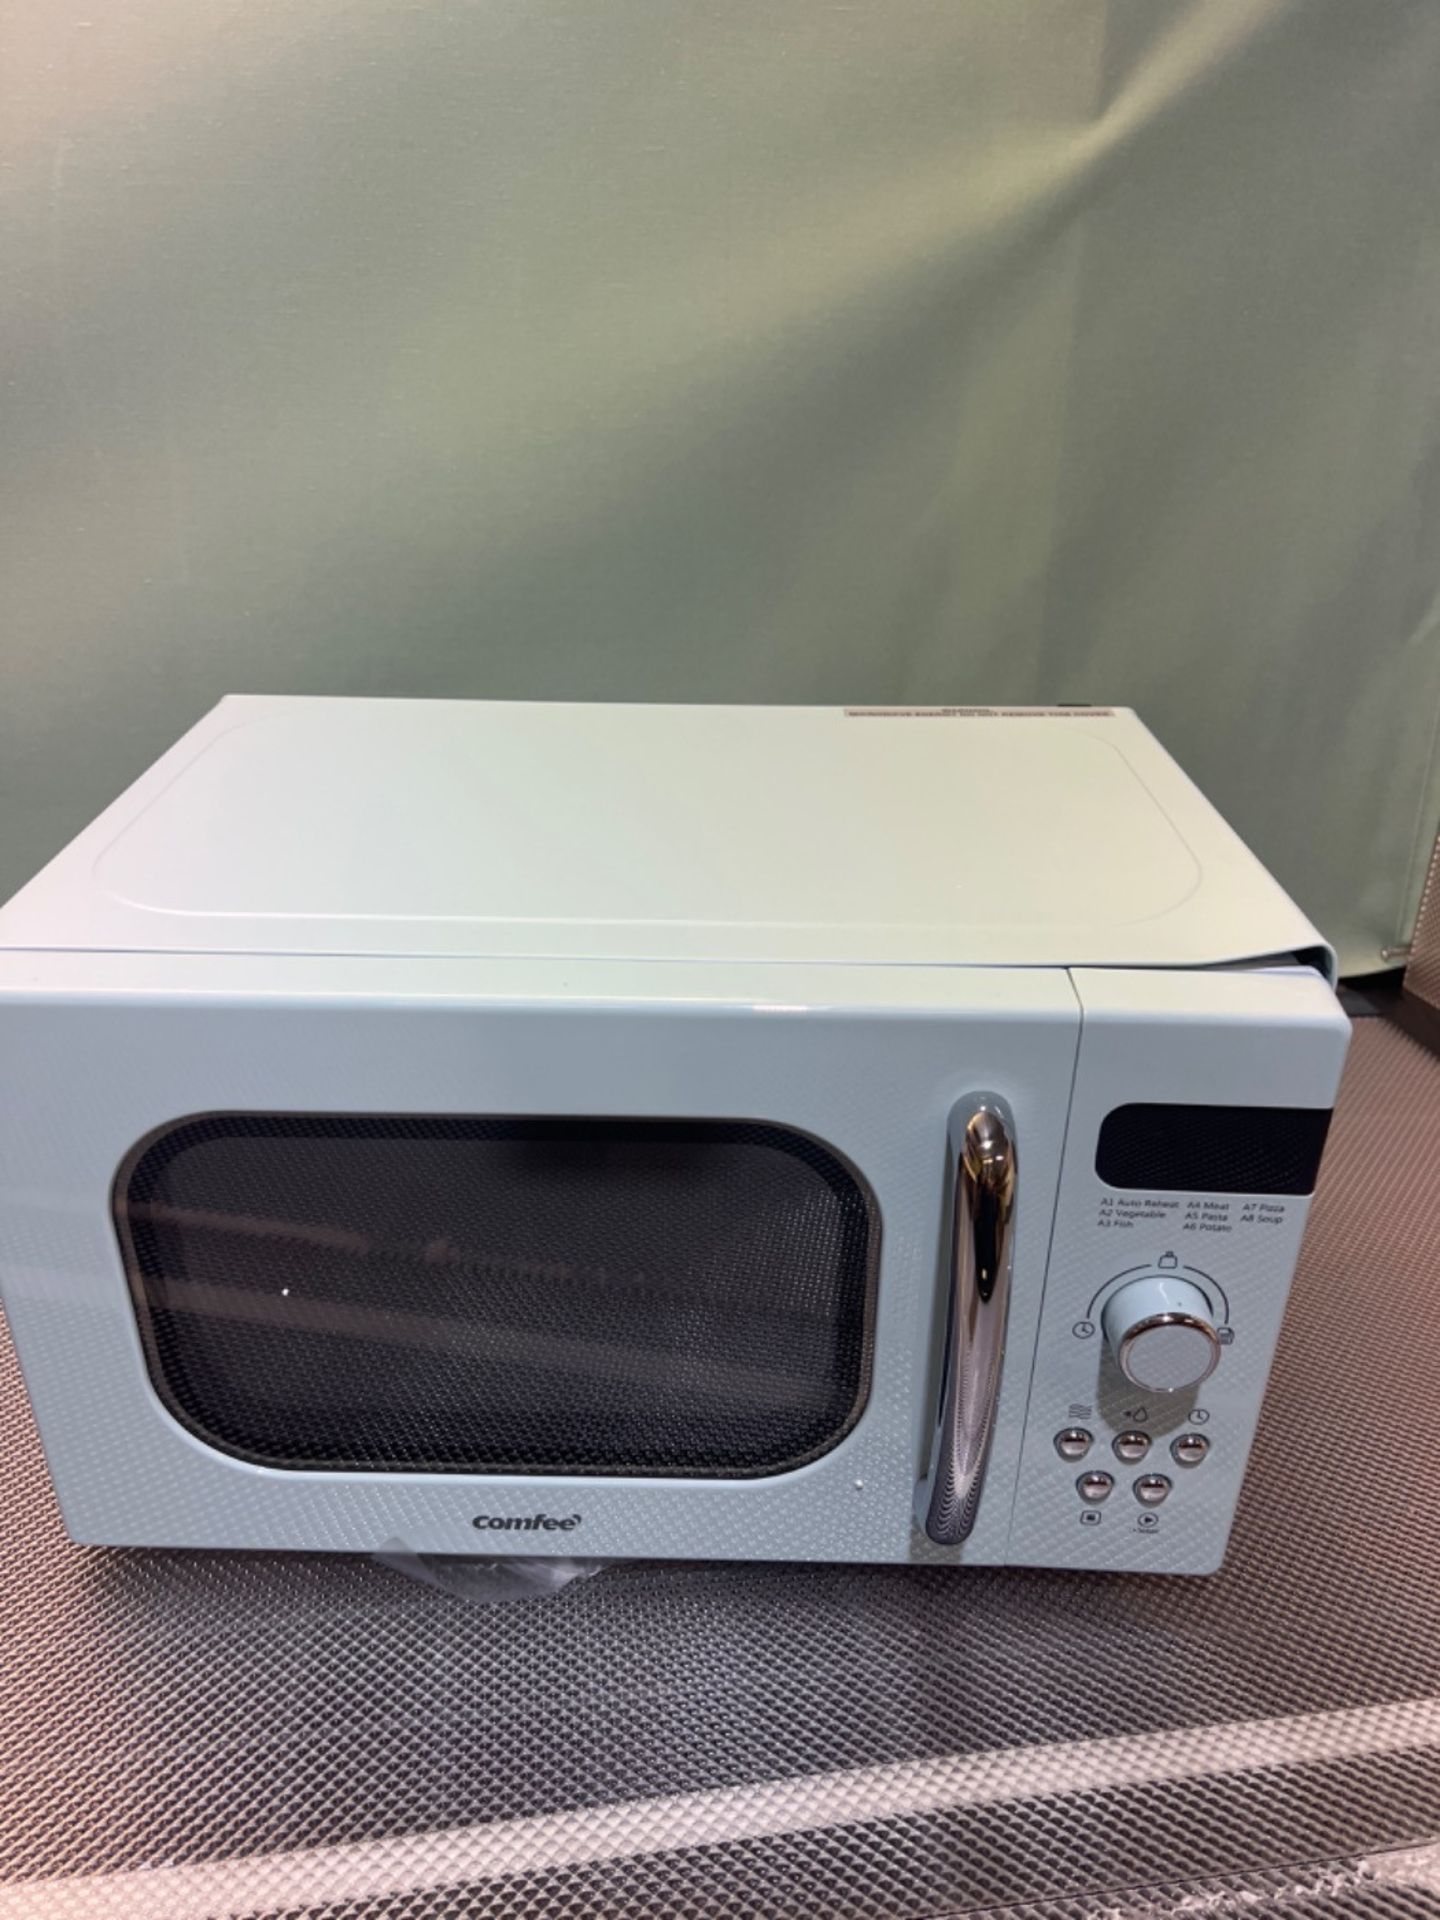 COMFEE' Retro Style 800w 20L Microwave Oven with 8 Auto Menus, 5 Cooking Power Levels, and Express  - Image 3 of 3